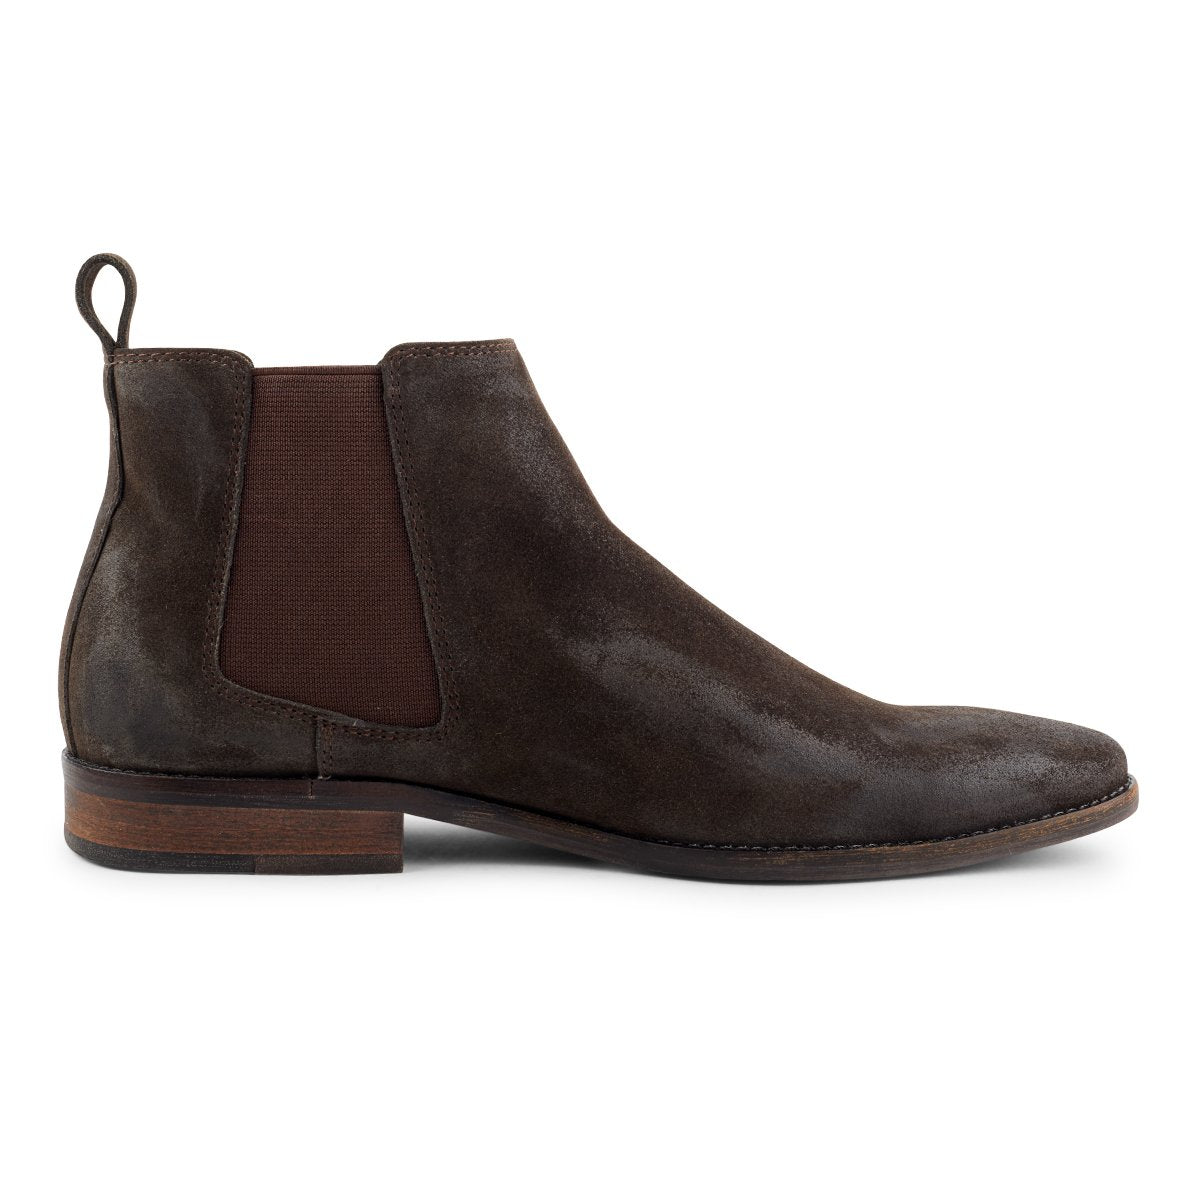 Camden oiled leather nu-buck Chelsea boot in chocolate - Milu James St